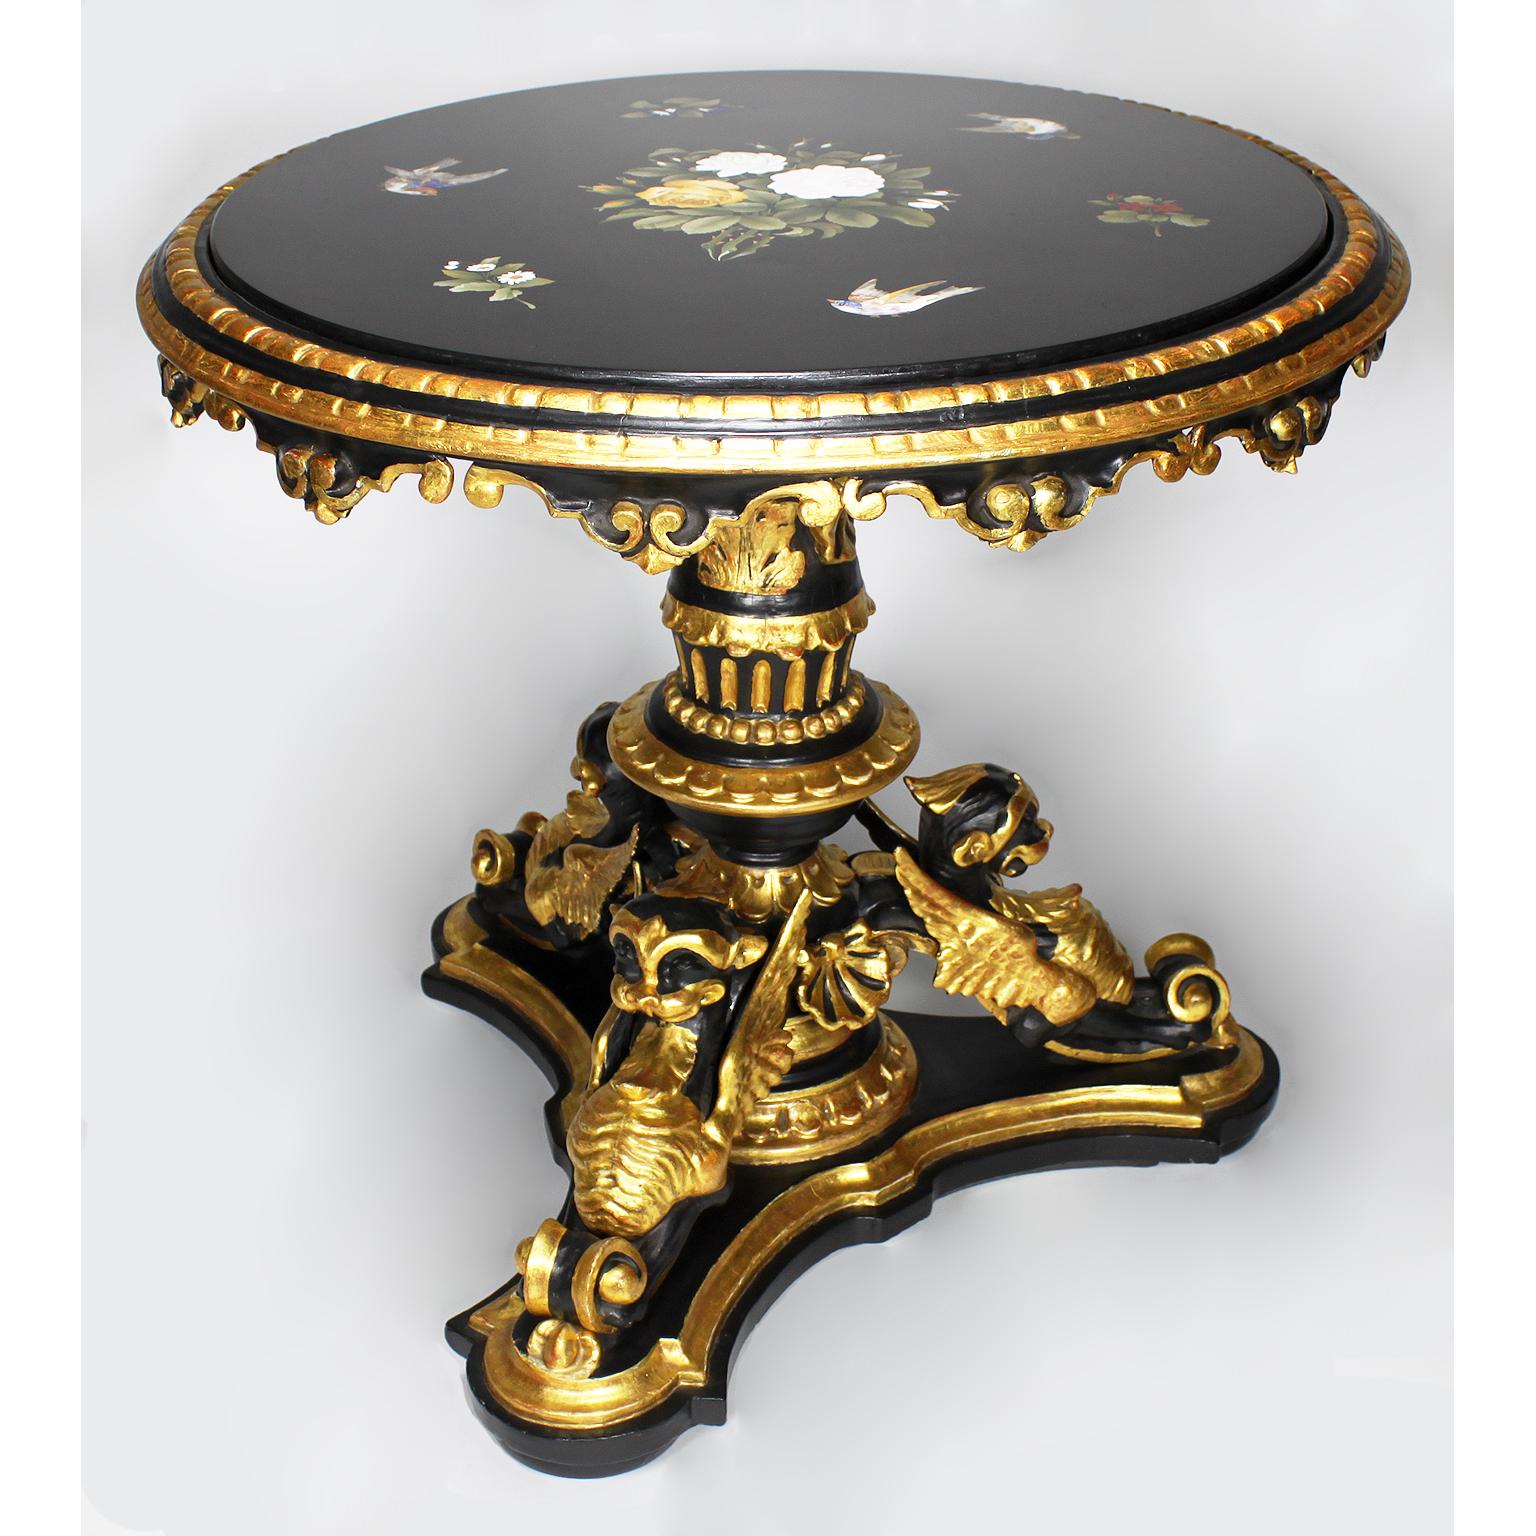 Hand-Carved Italian 19th-20th Century Ebonized and Parcel Giltwood Carved Pietra Dura Table